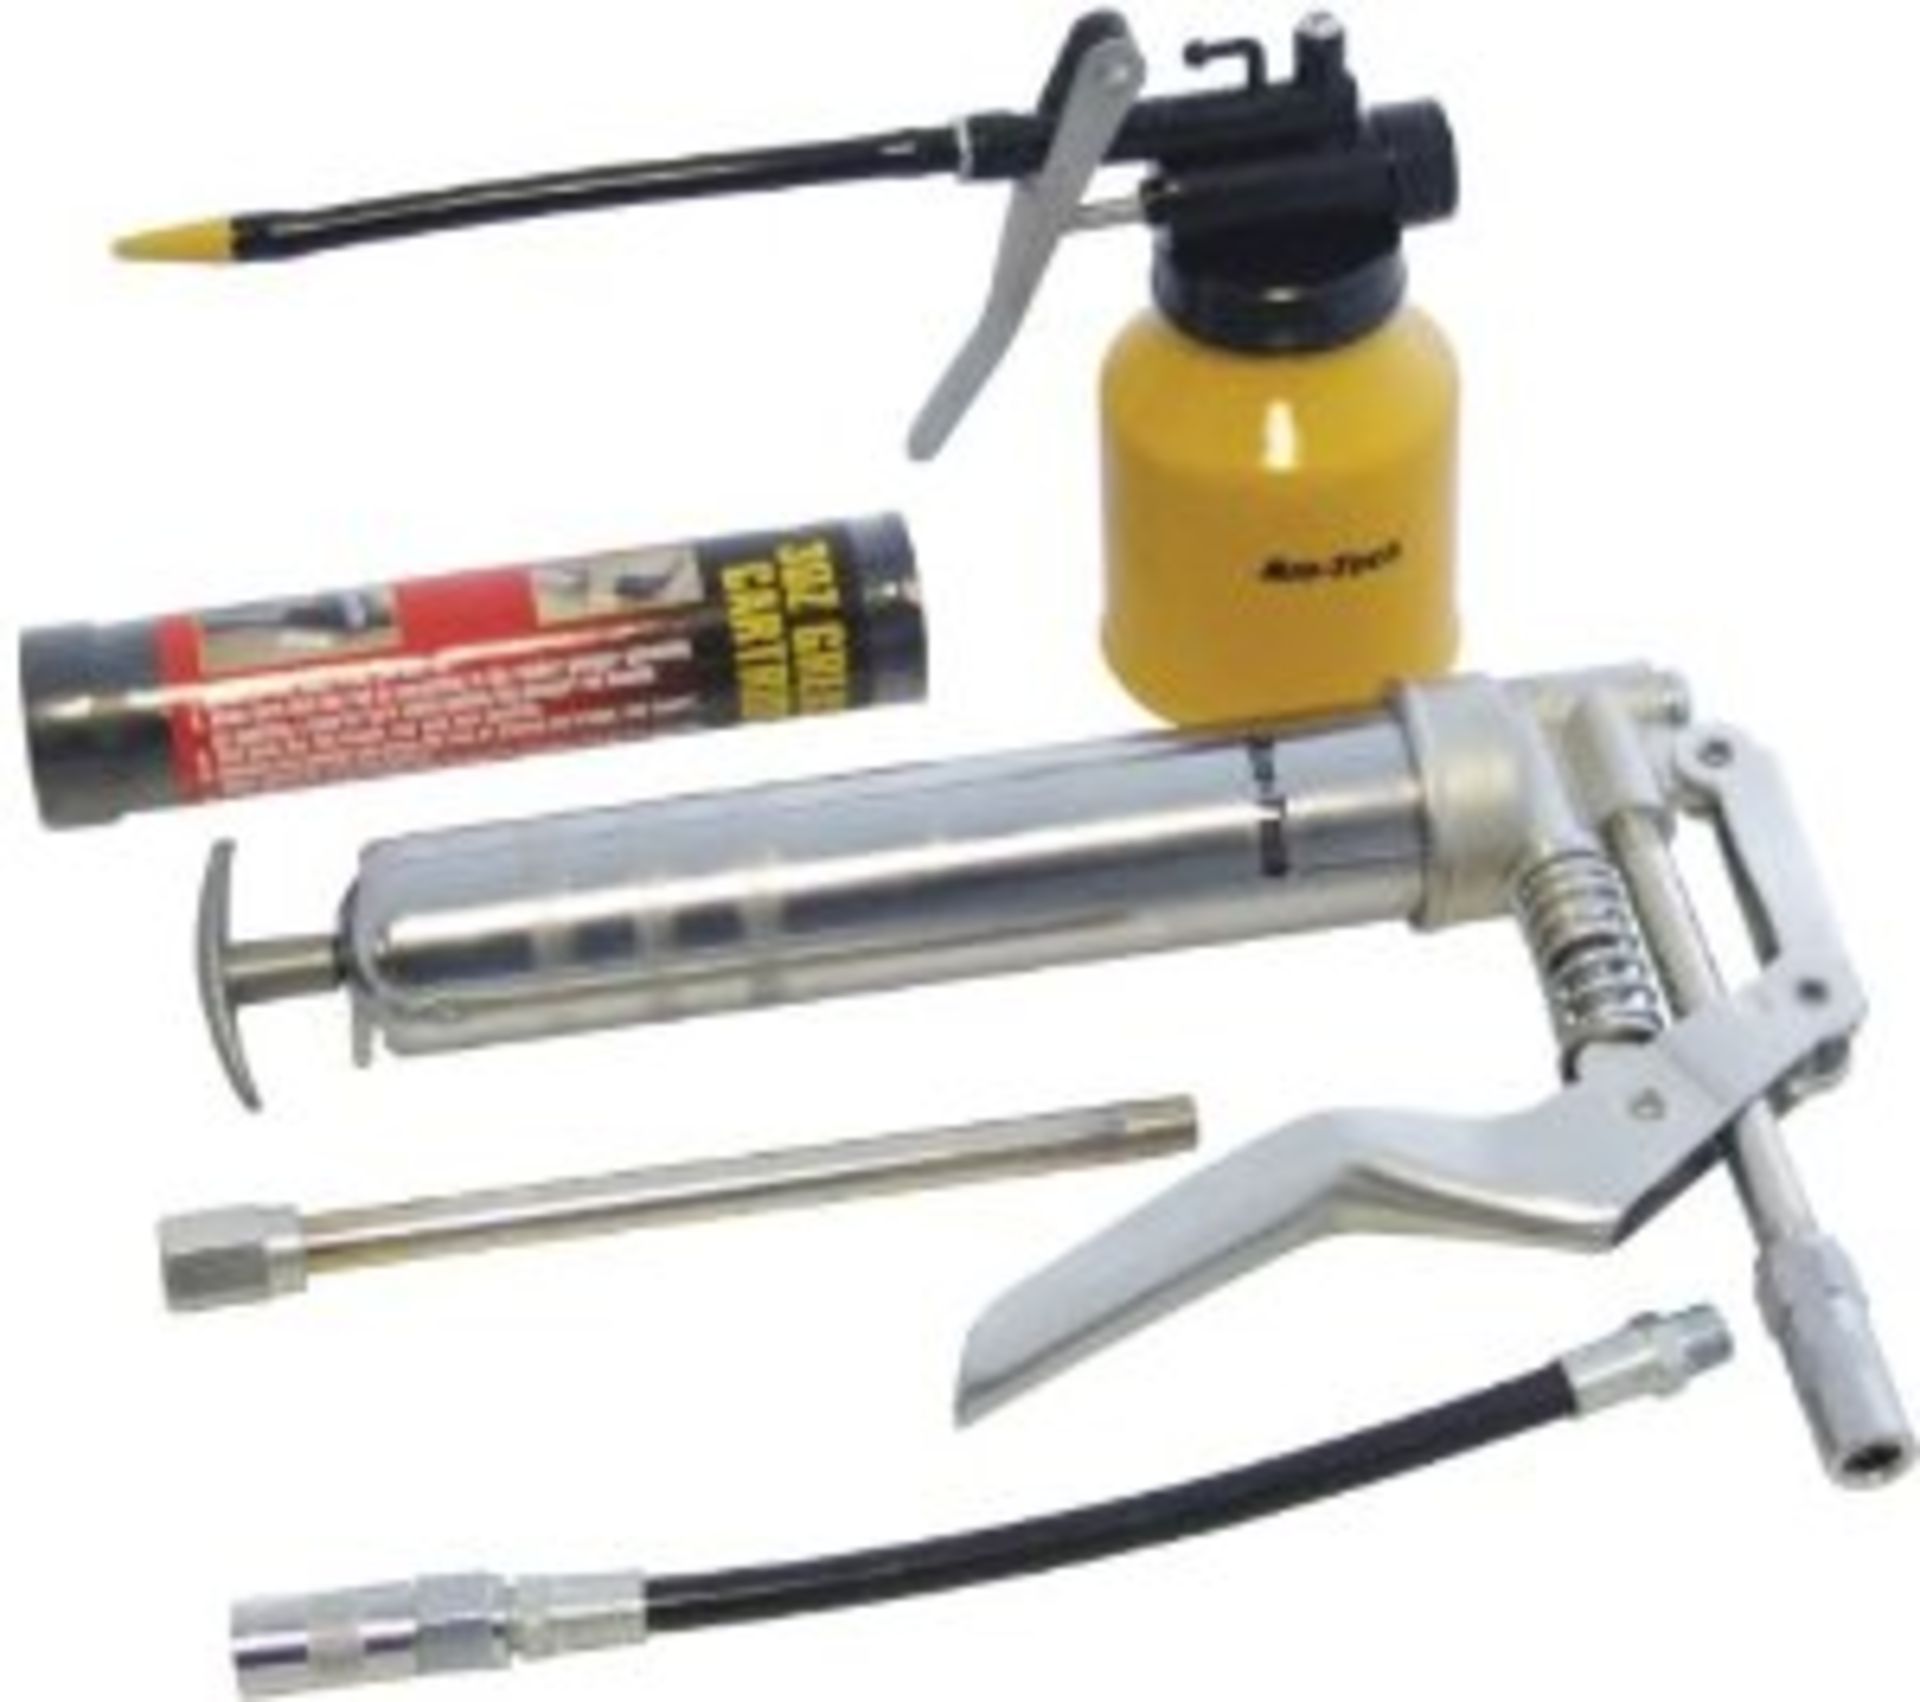 V Brand New 4 Piece Grease Gun Set Includes Grease Cartridge and High Pressure Oil Can